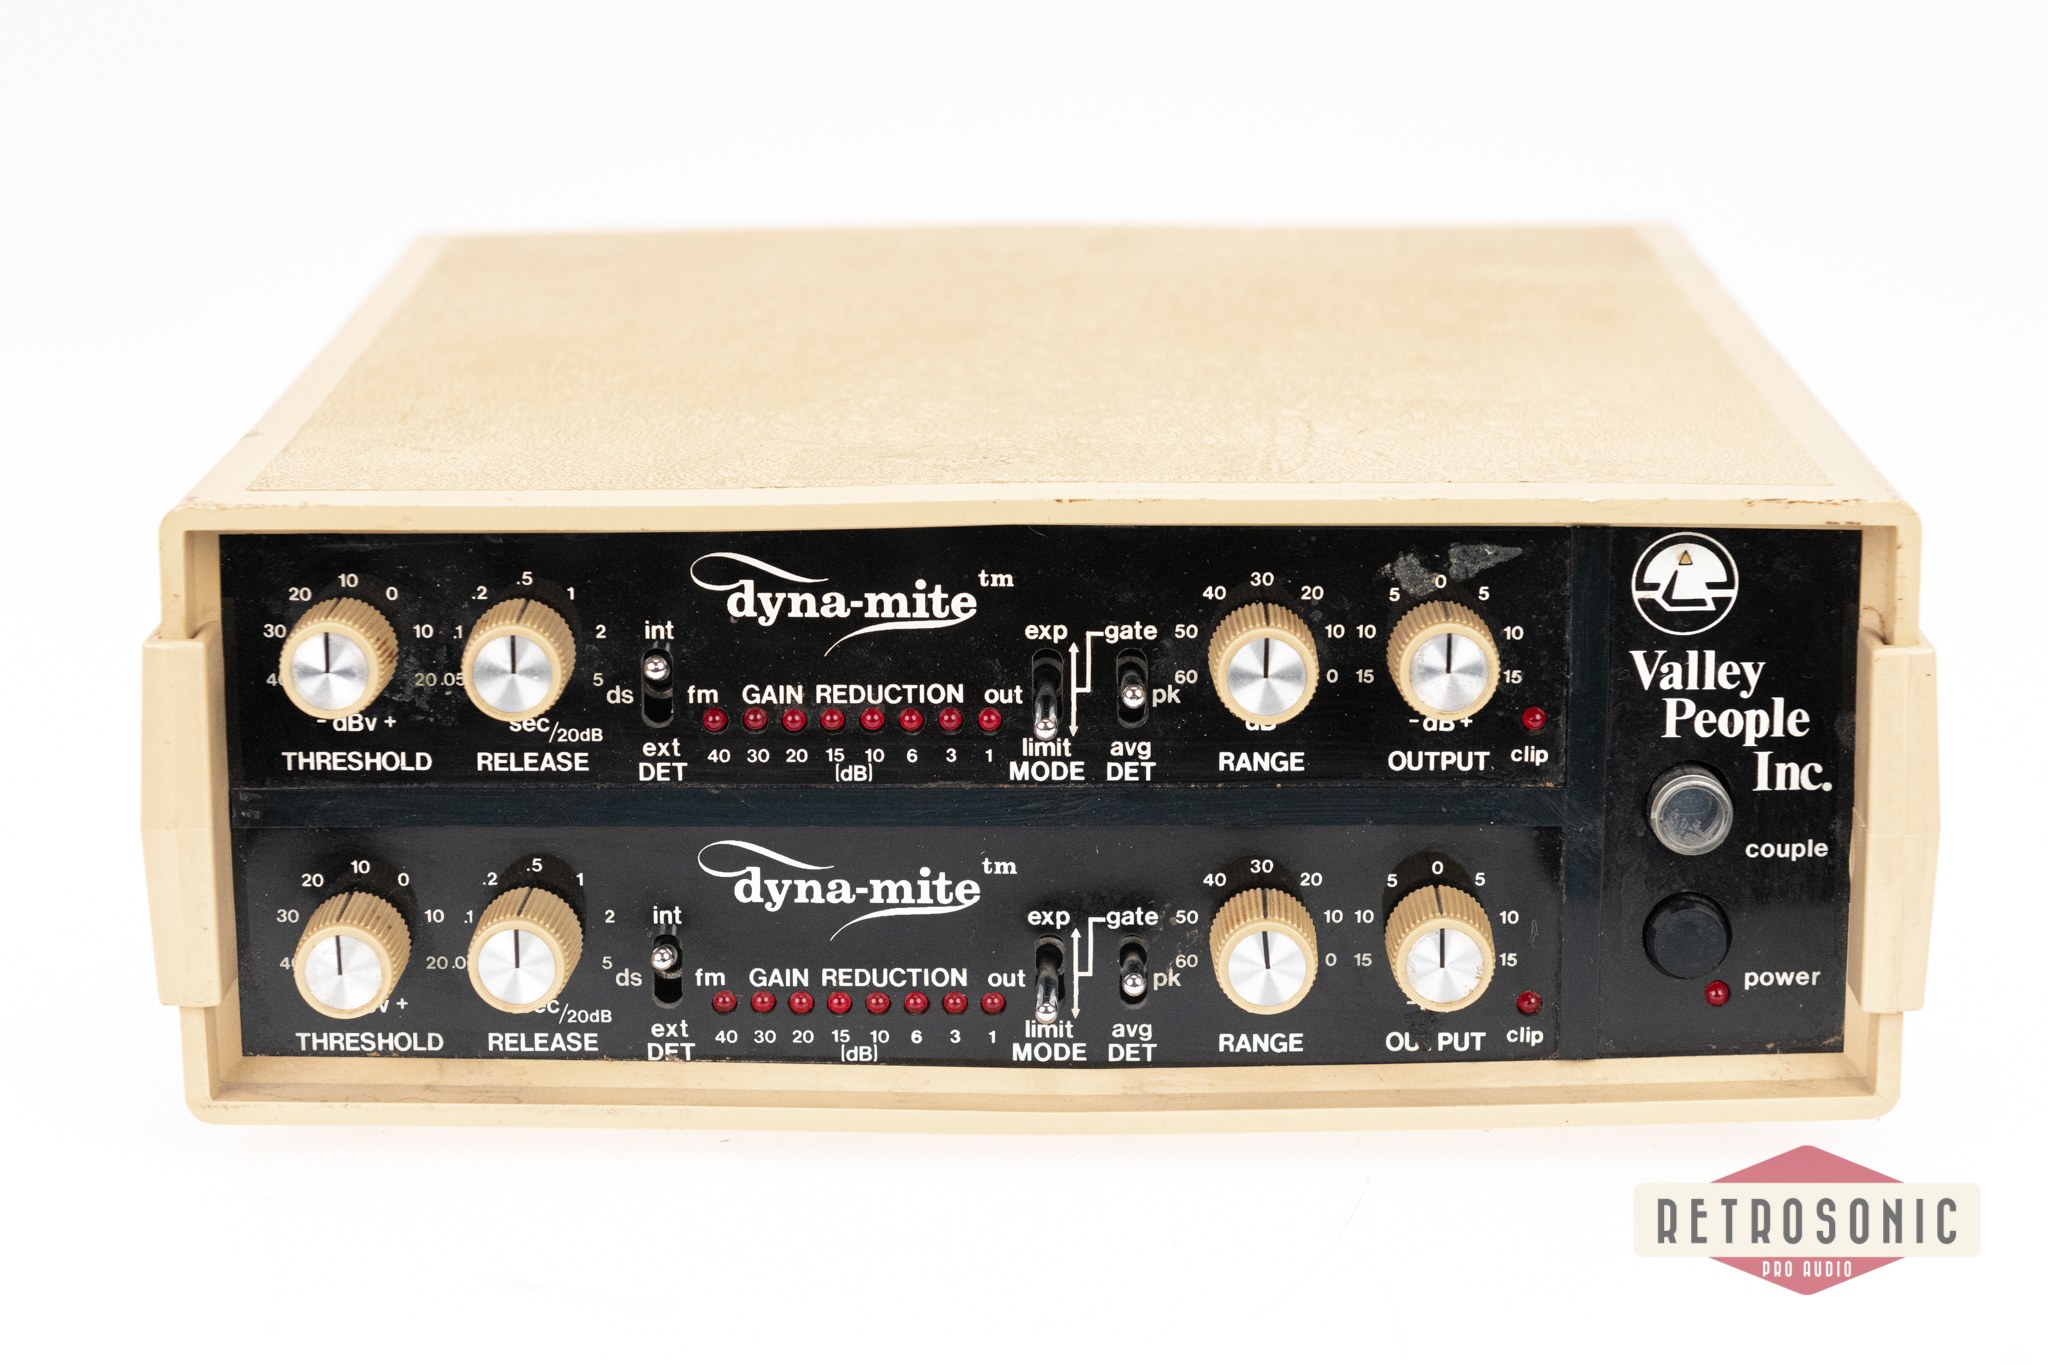 Valley People Dyna-Mite 410-2 Limiter/Compressor pair